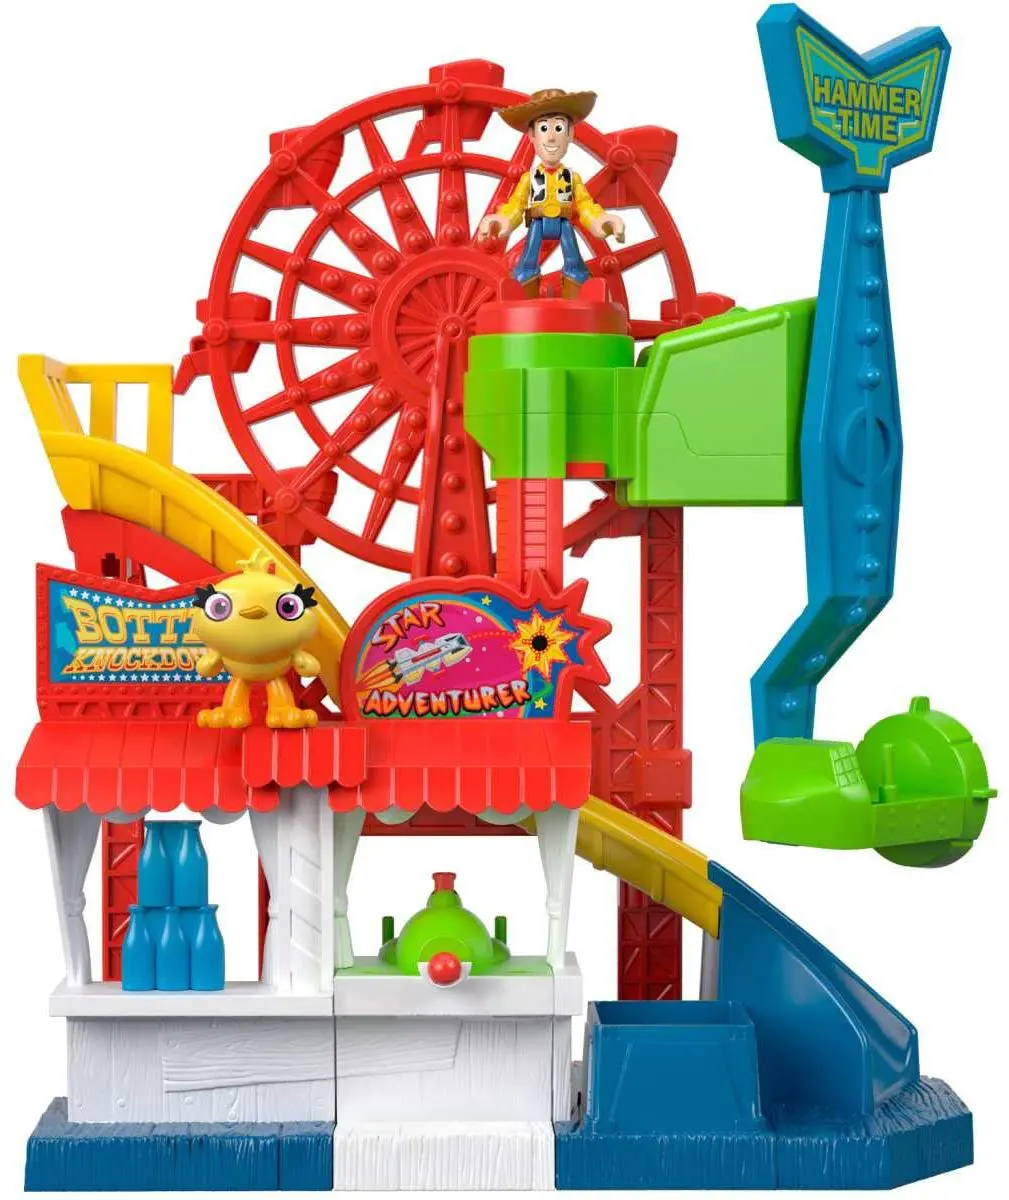 Toy Story Fisher-Price Imaginext Playset Featuring Disney Pixar Carnival - Top Toys and Gifts for Four Year Old Boys 1